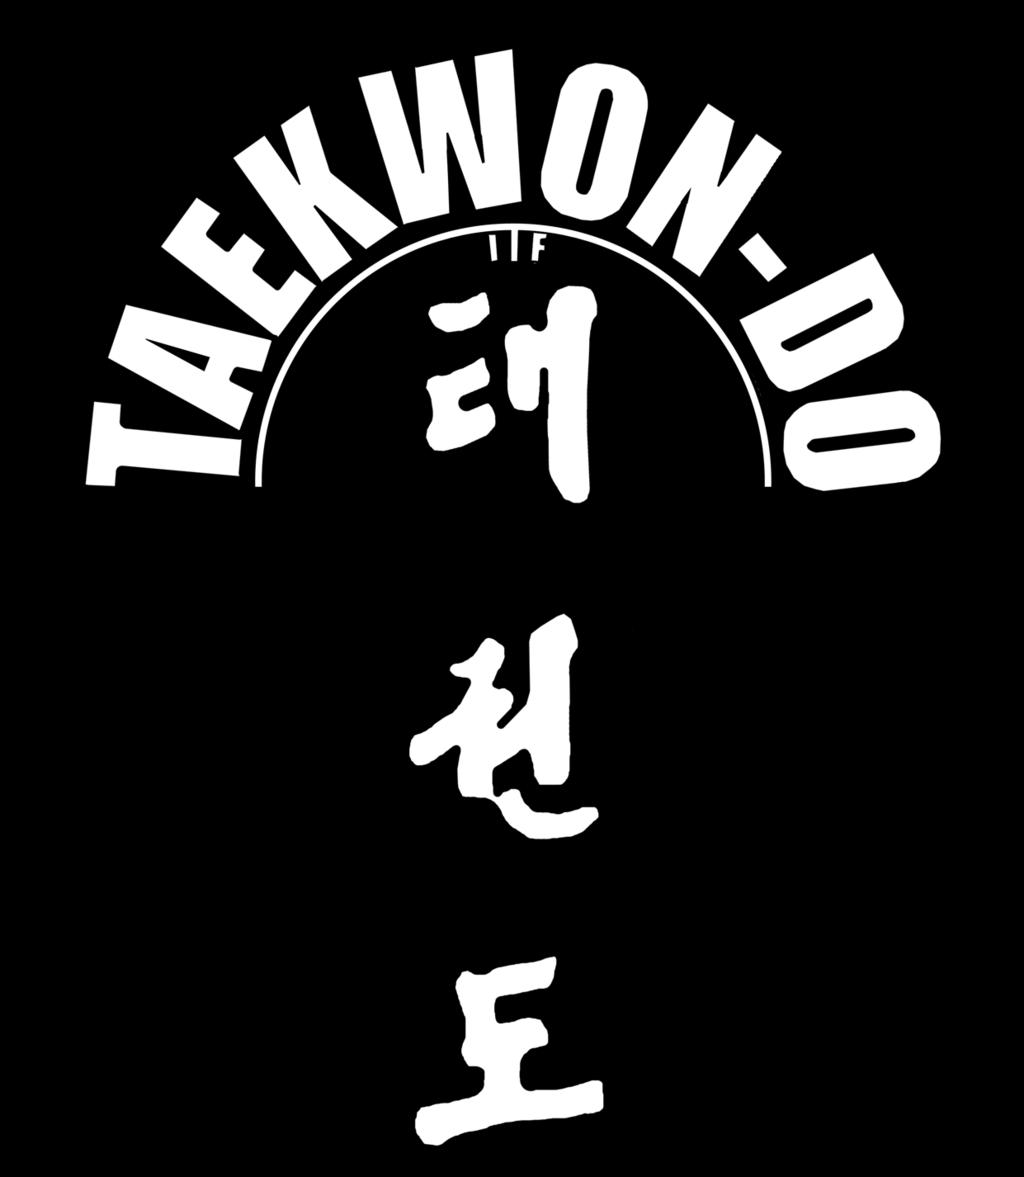 Foreword International Taekwon-Do Federation the Traditional Martial Art as developed by the founder General Choi Hong Hi and now under